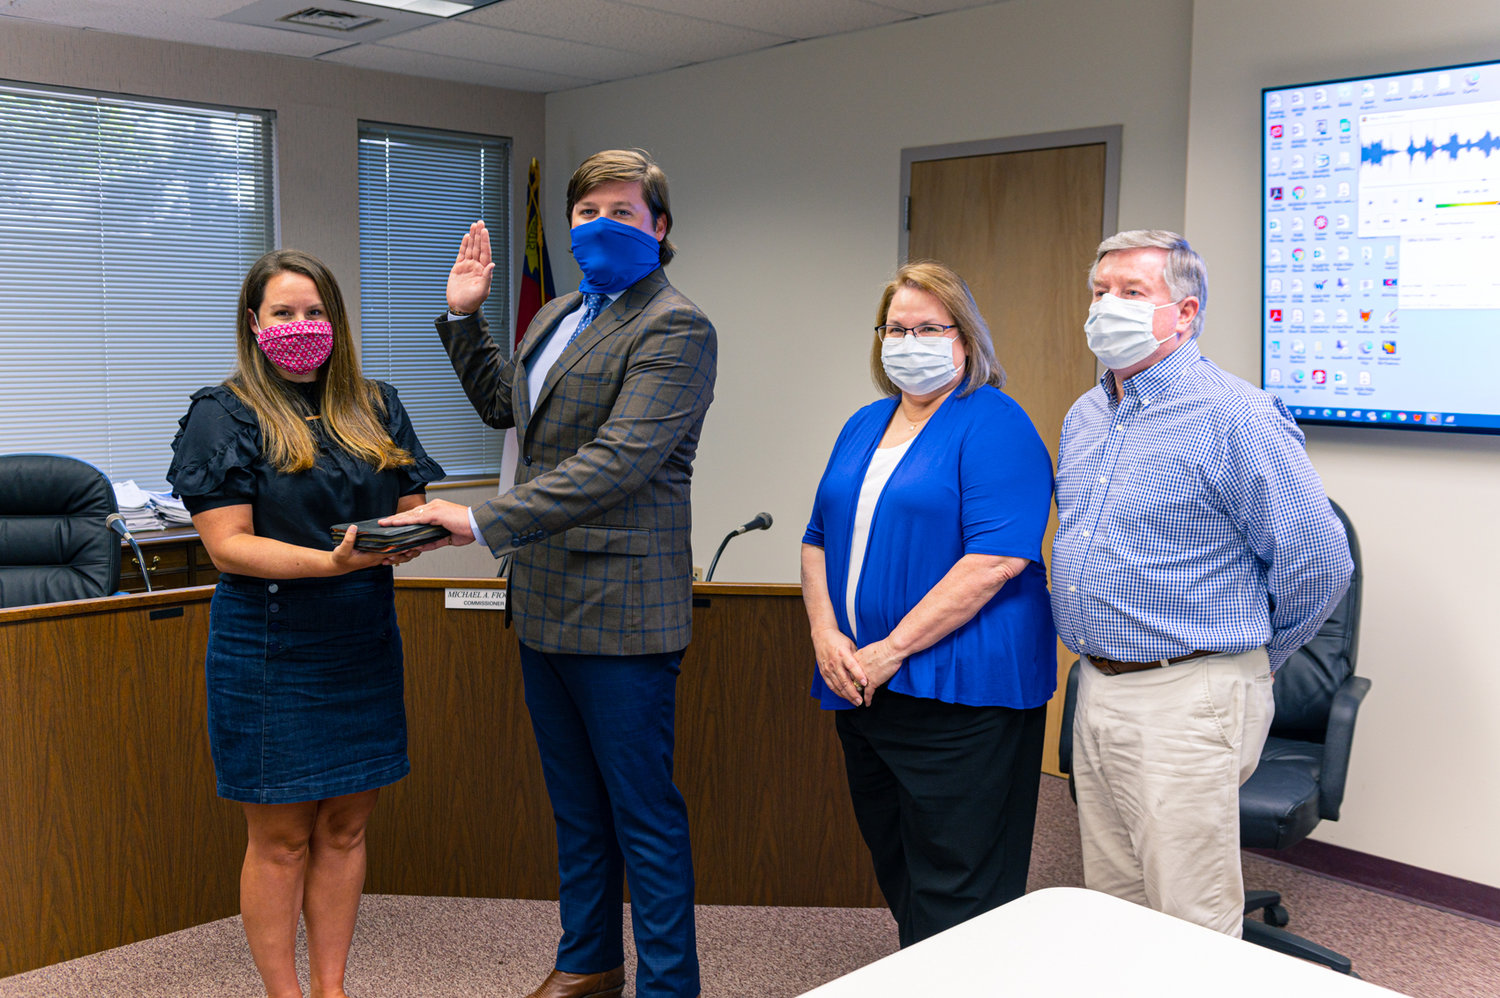 Chris Kennedy (second to left) is sworn in as his wife (left), Emily held a family Bible. He was joined by his parents Debbie and Dale Kennedy (right) of Asheboro.